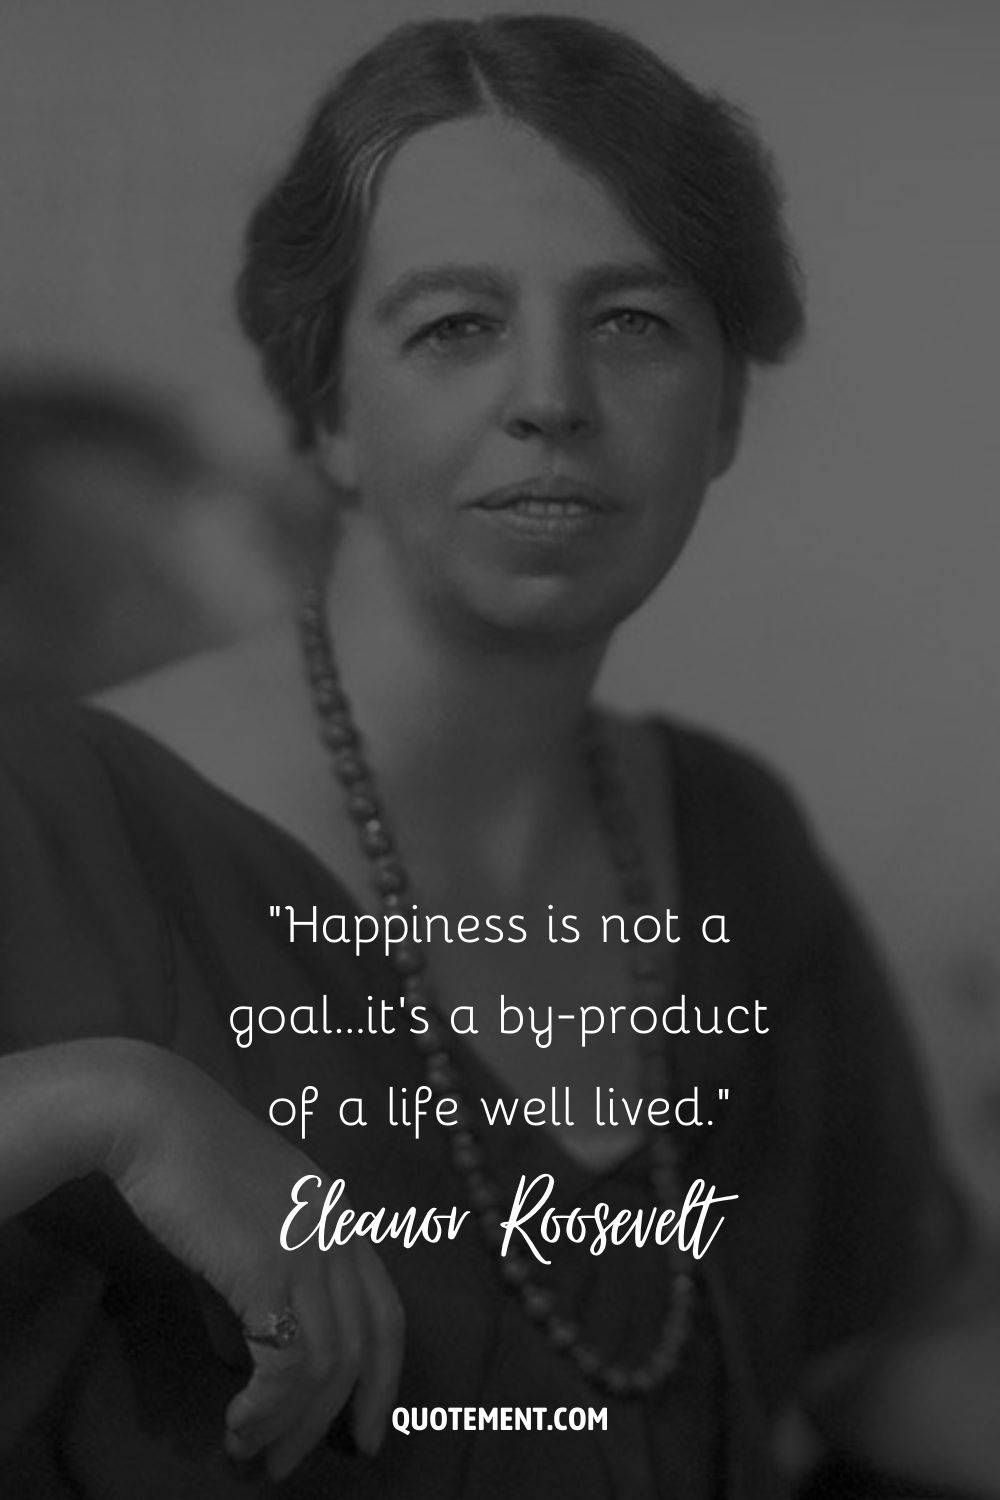 Happiness is not a goal...it's a by-product of a life well lived